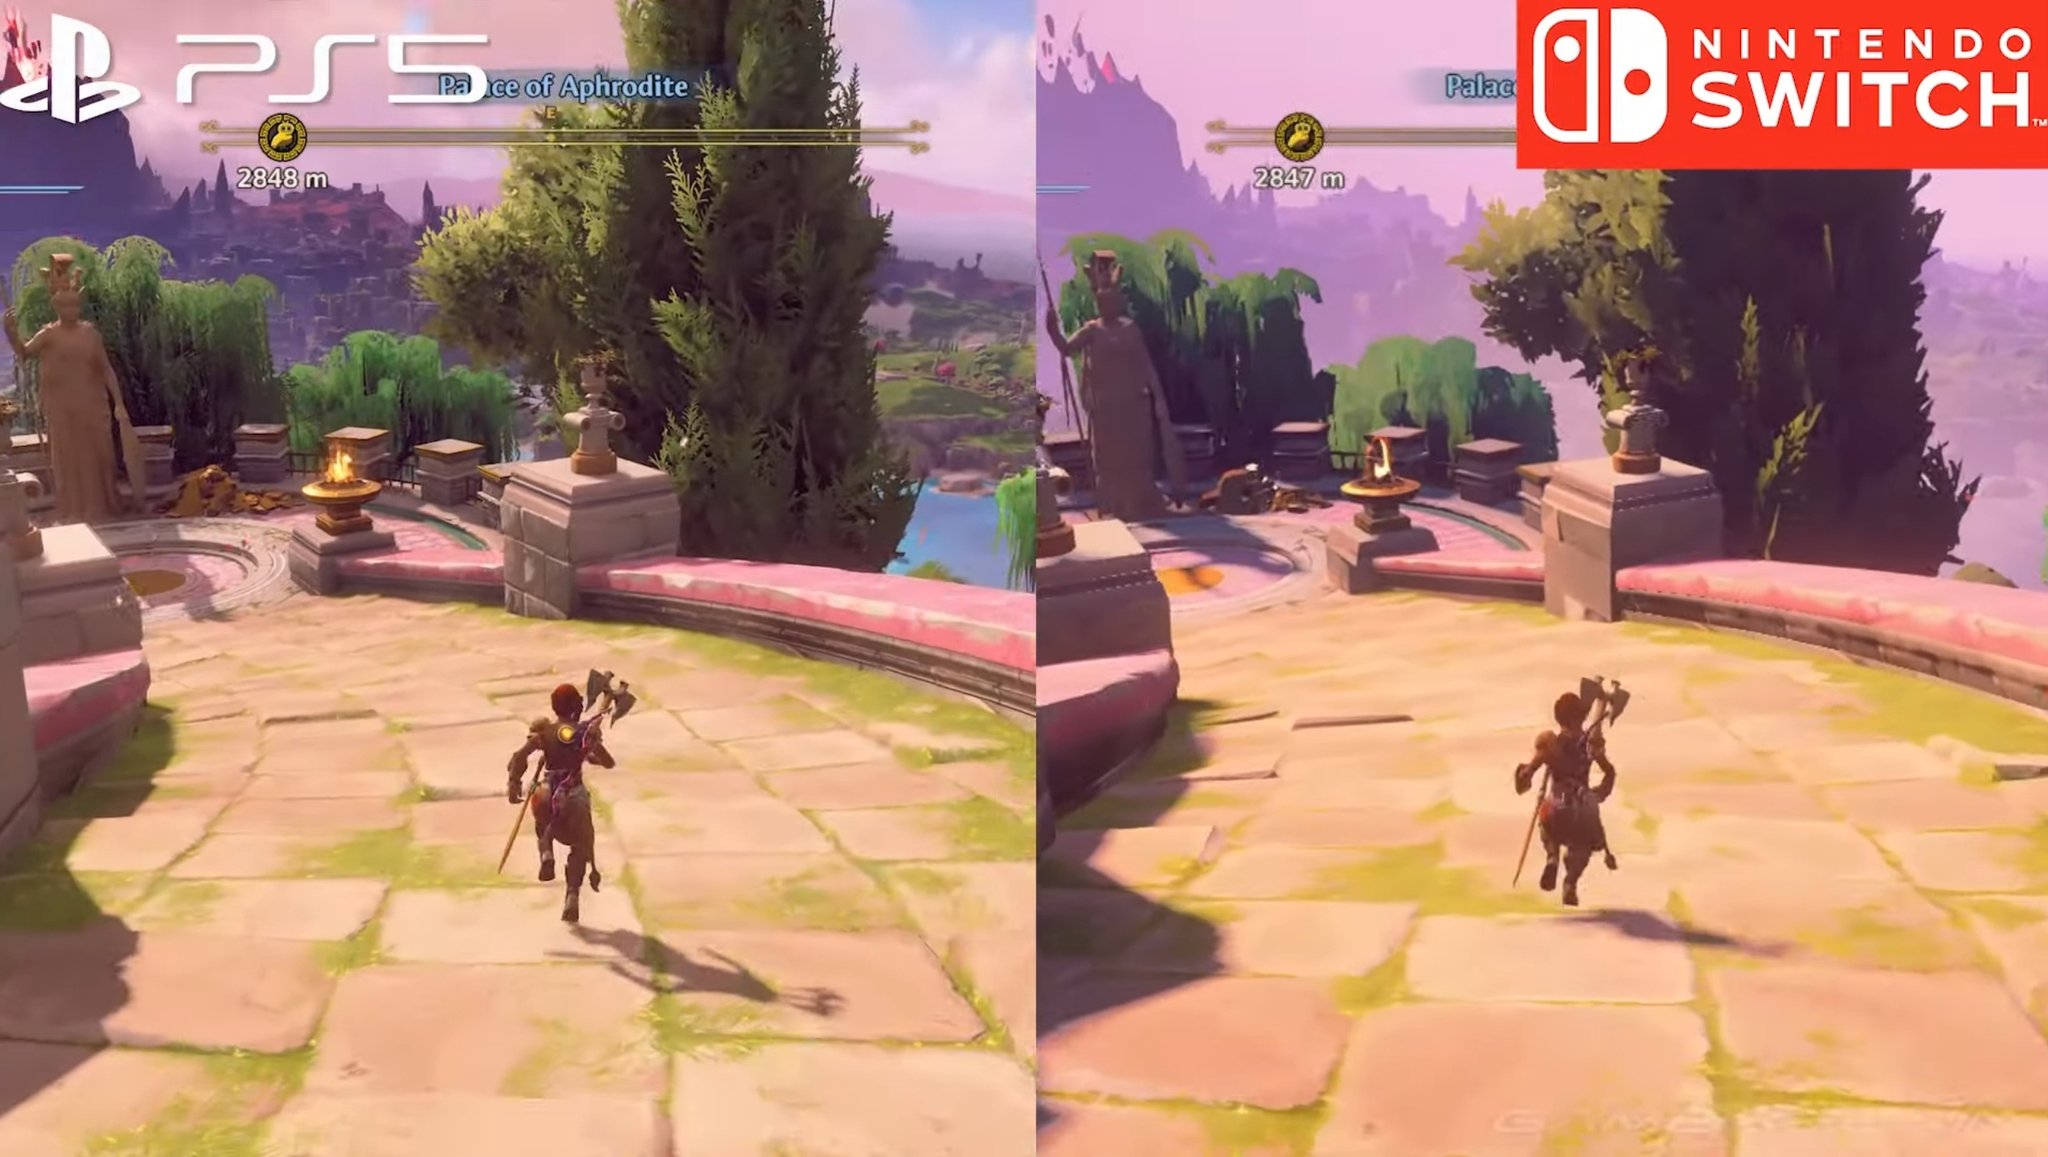 Immortals Fenyx Rising Switch gameplay, Switch vs. PS5 comparison